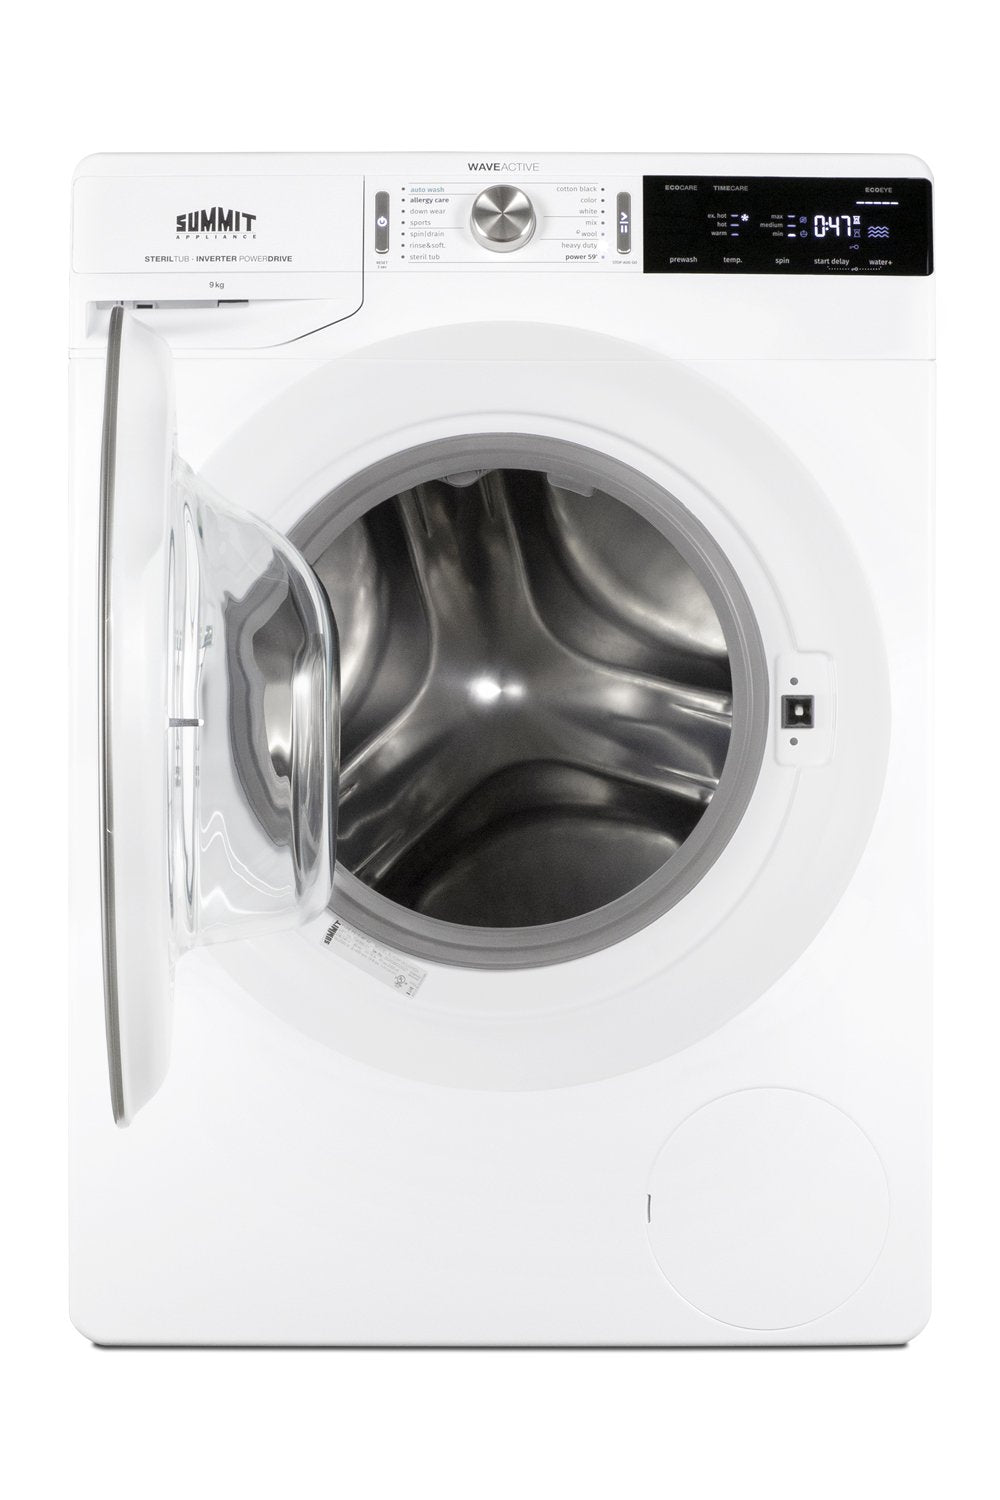 SUMMIT 24 in. 208-240V Front-Loading Washer (SLW241W)